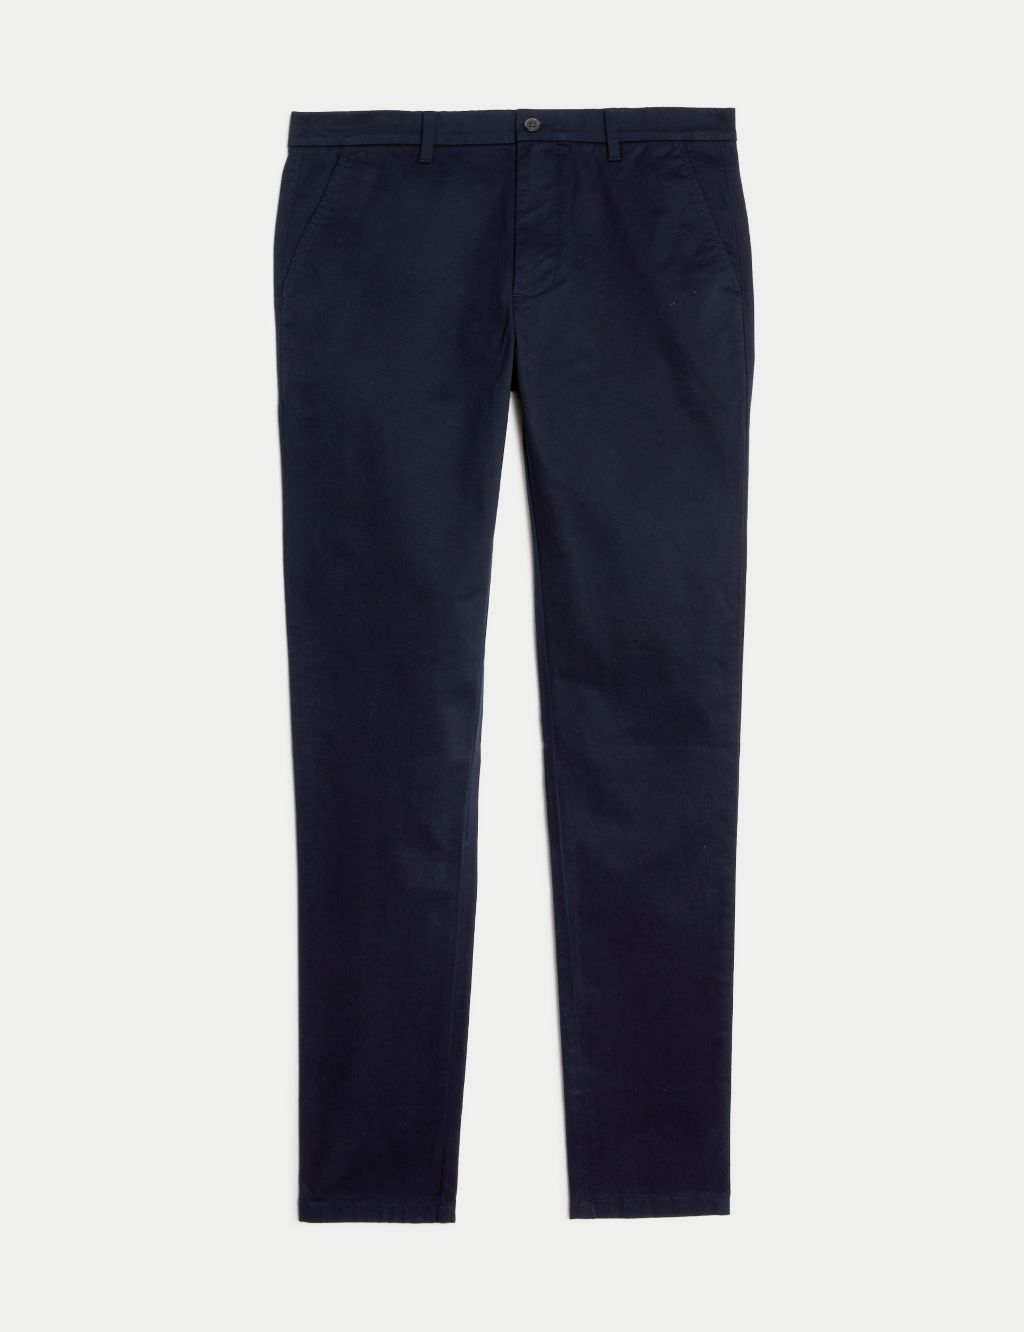 Skinny Fit Stretch Chinos image 2